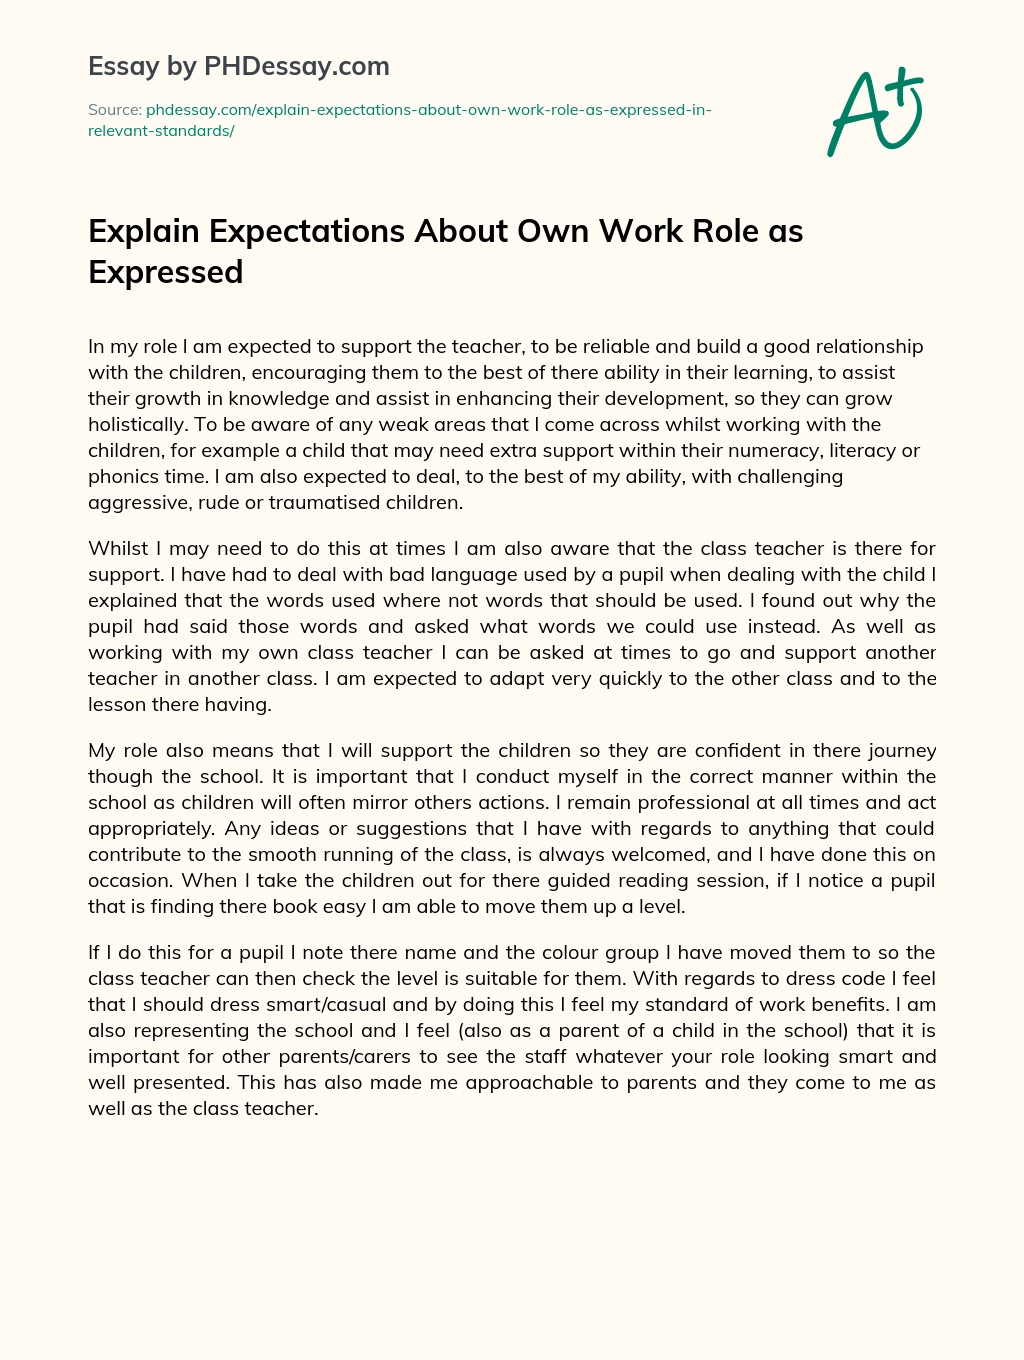 Explain Expectations About Own Work Role as Expressed essay